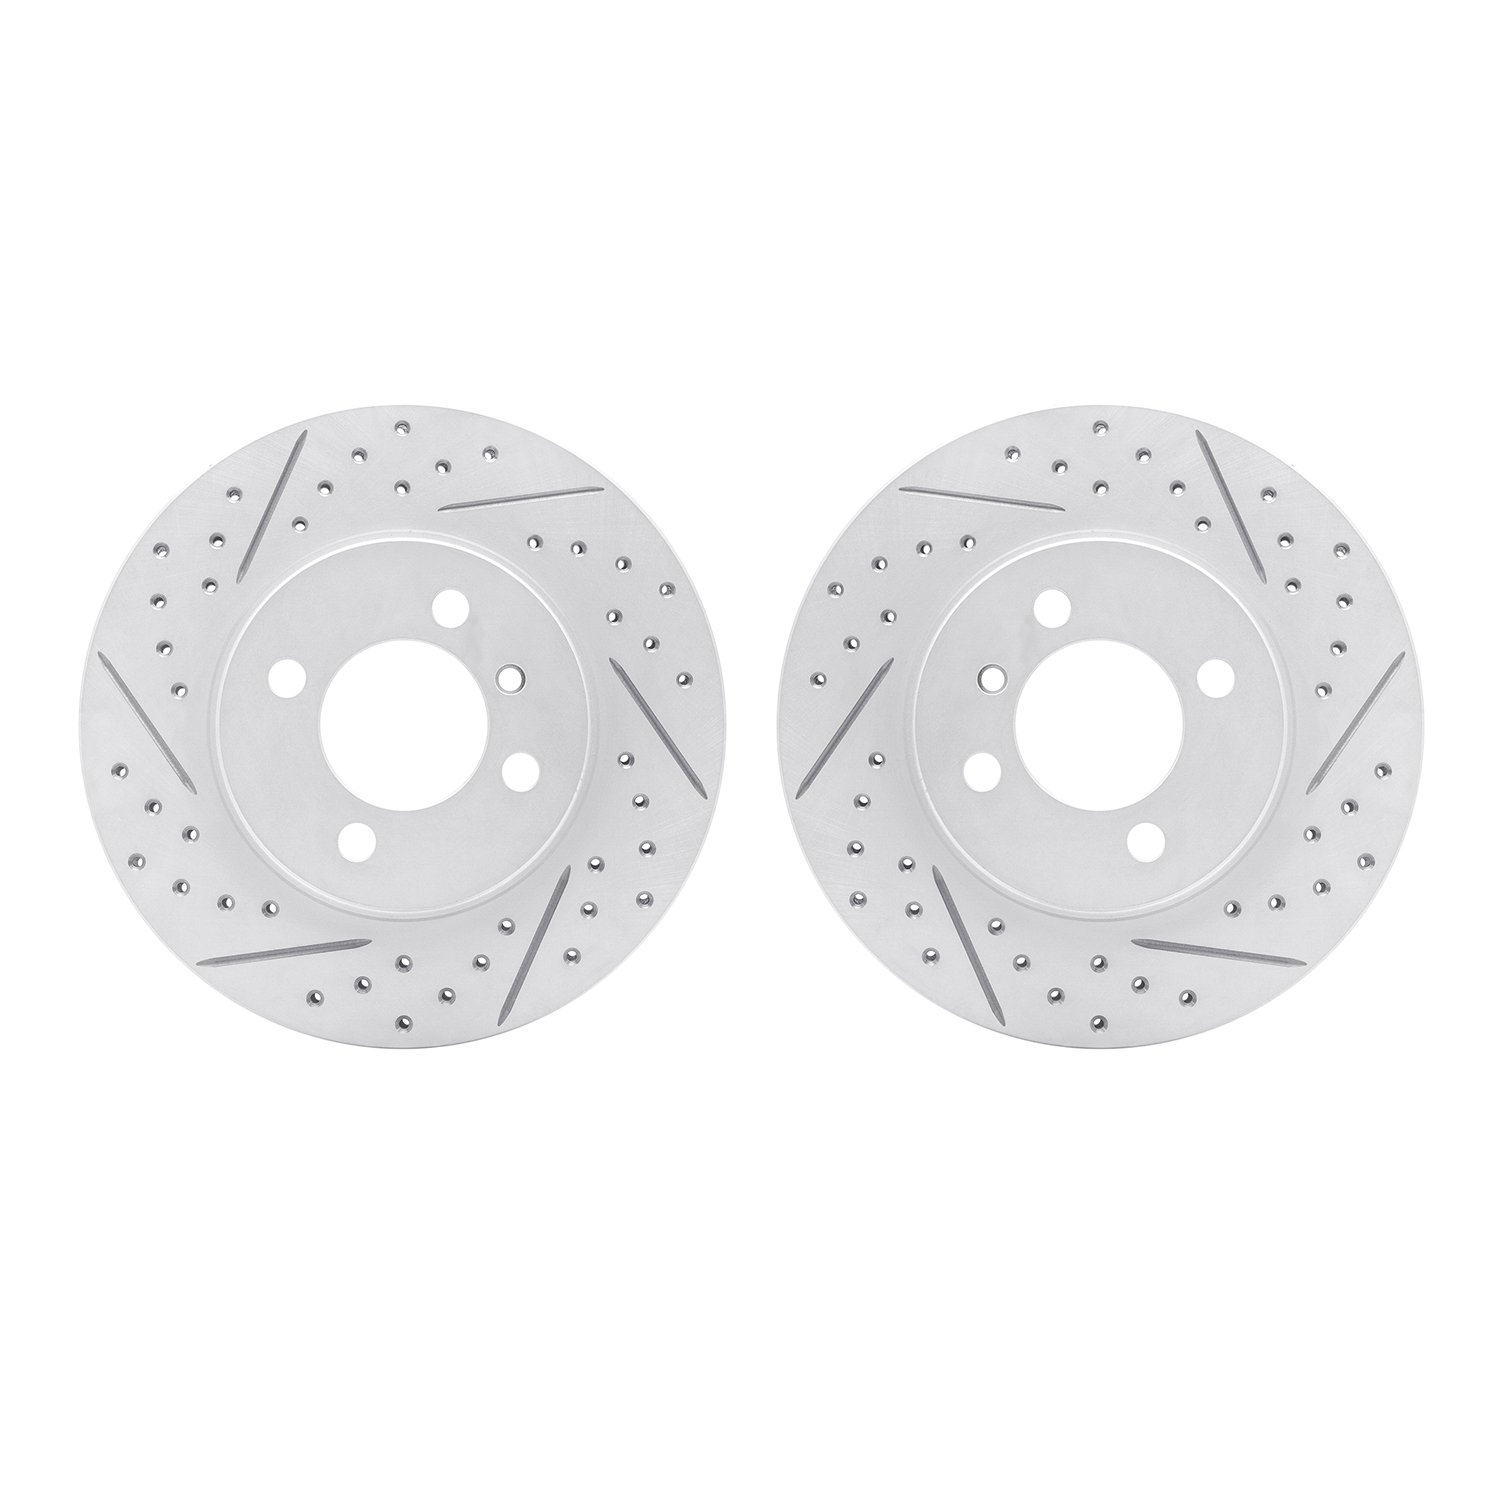 2002-31008 Geoperformance Drilled/Slotted Brake Rotors, 1984-1991 BMW, Position: Front